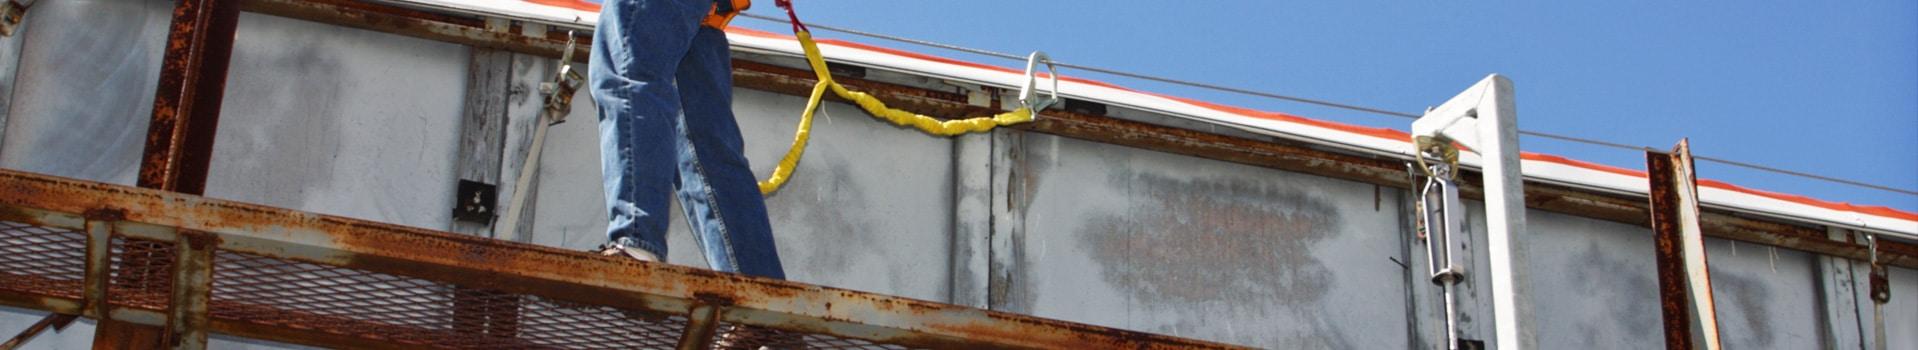 billboard fall protection systems